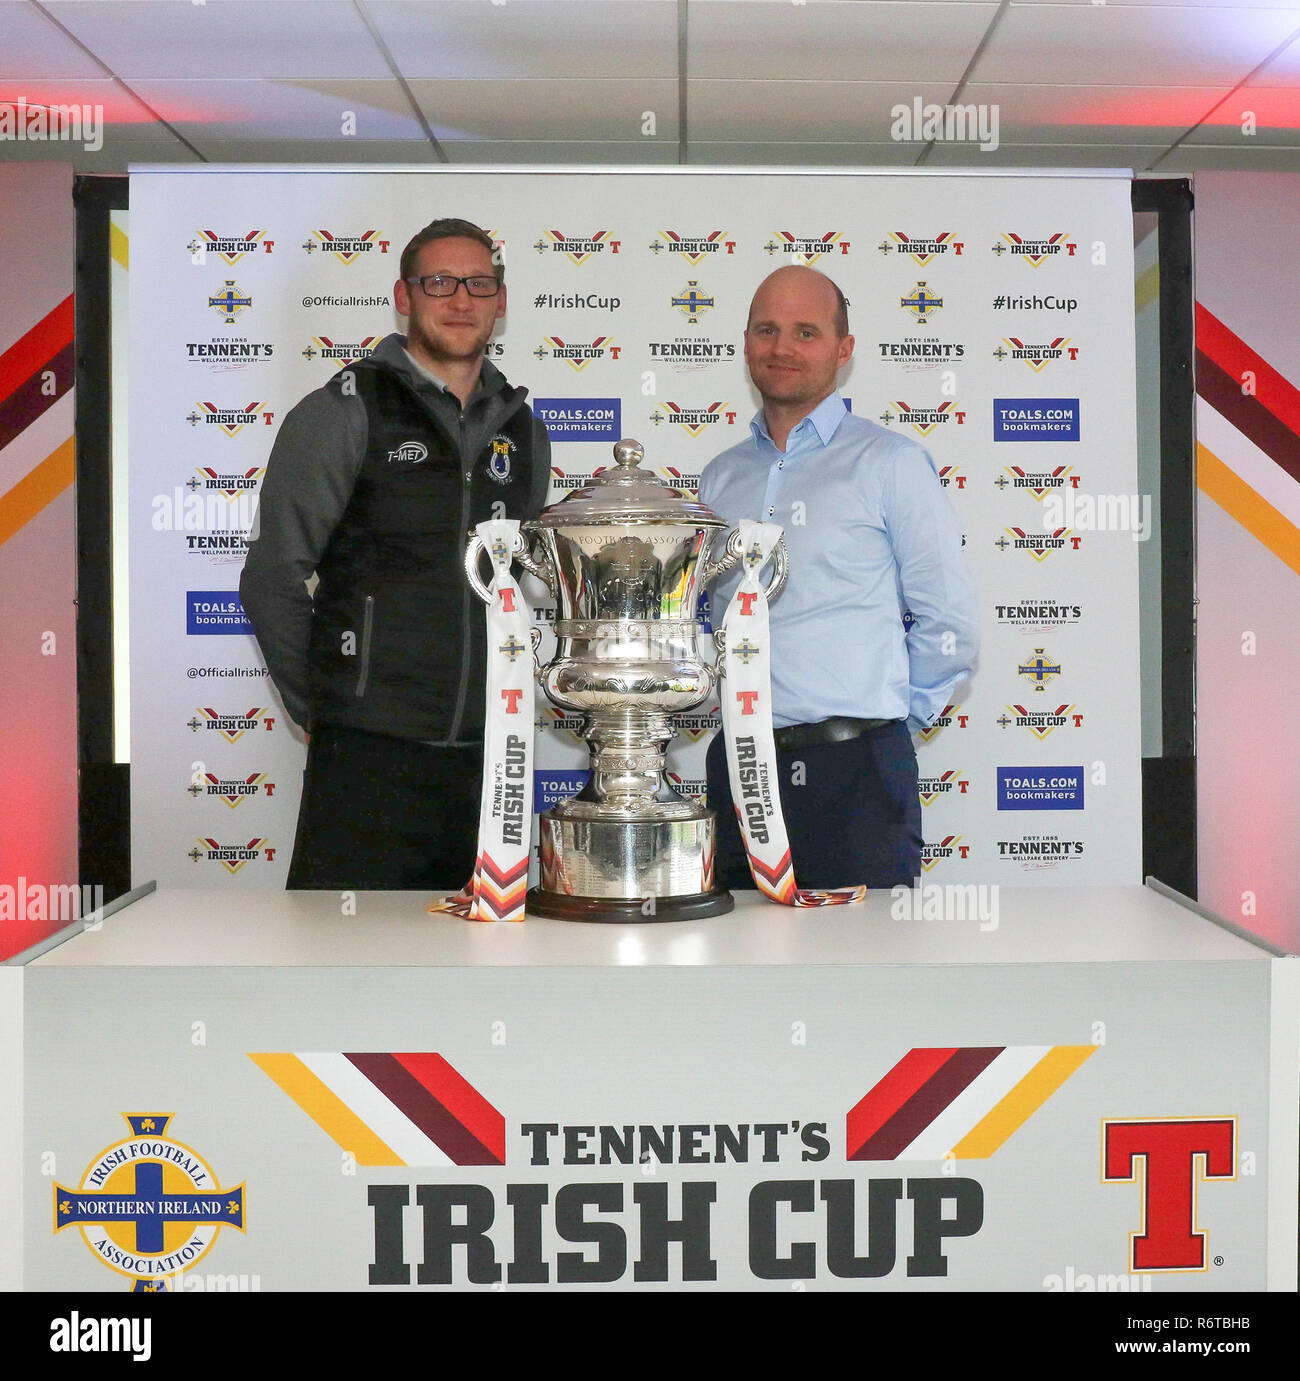 Windsor Park, Belfast, Northern Ireland, UK. 06 December 2018. The draw for the Fifth Round of the Tennent's Irish Cup was made today. At this stage Irish Premiership and Championship clubs come into the draw along with intermediate/junior sides. The fifth round ties will be played on 05 January 2019. Cliftonville v Dungannon Swifts. (L-R) Dungannon Swifts manager Kris Lindsay and Cliftonville manager Barry Gray. Credit: David Hunter/Alamy Live News. Stock Photo